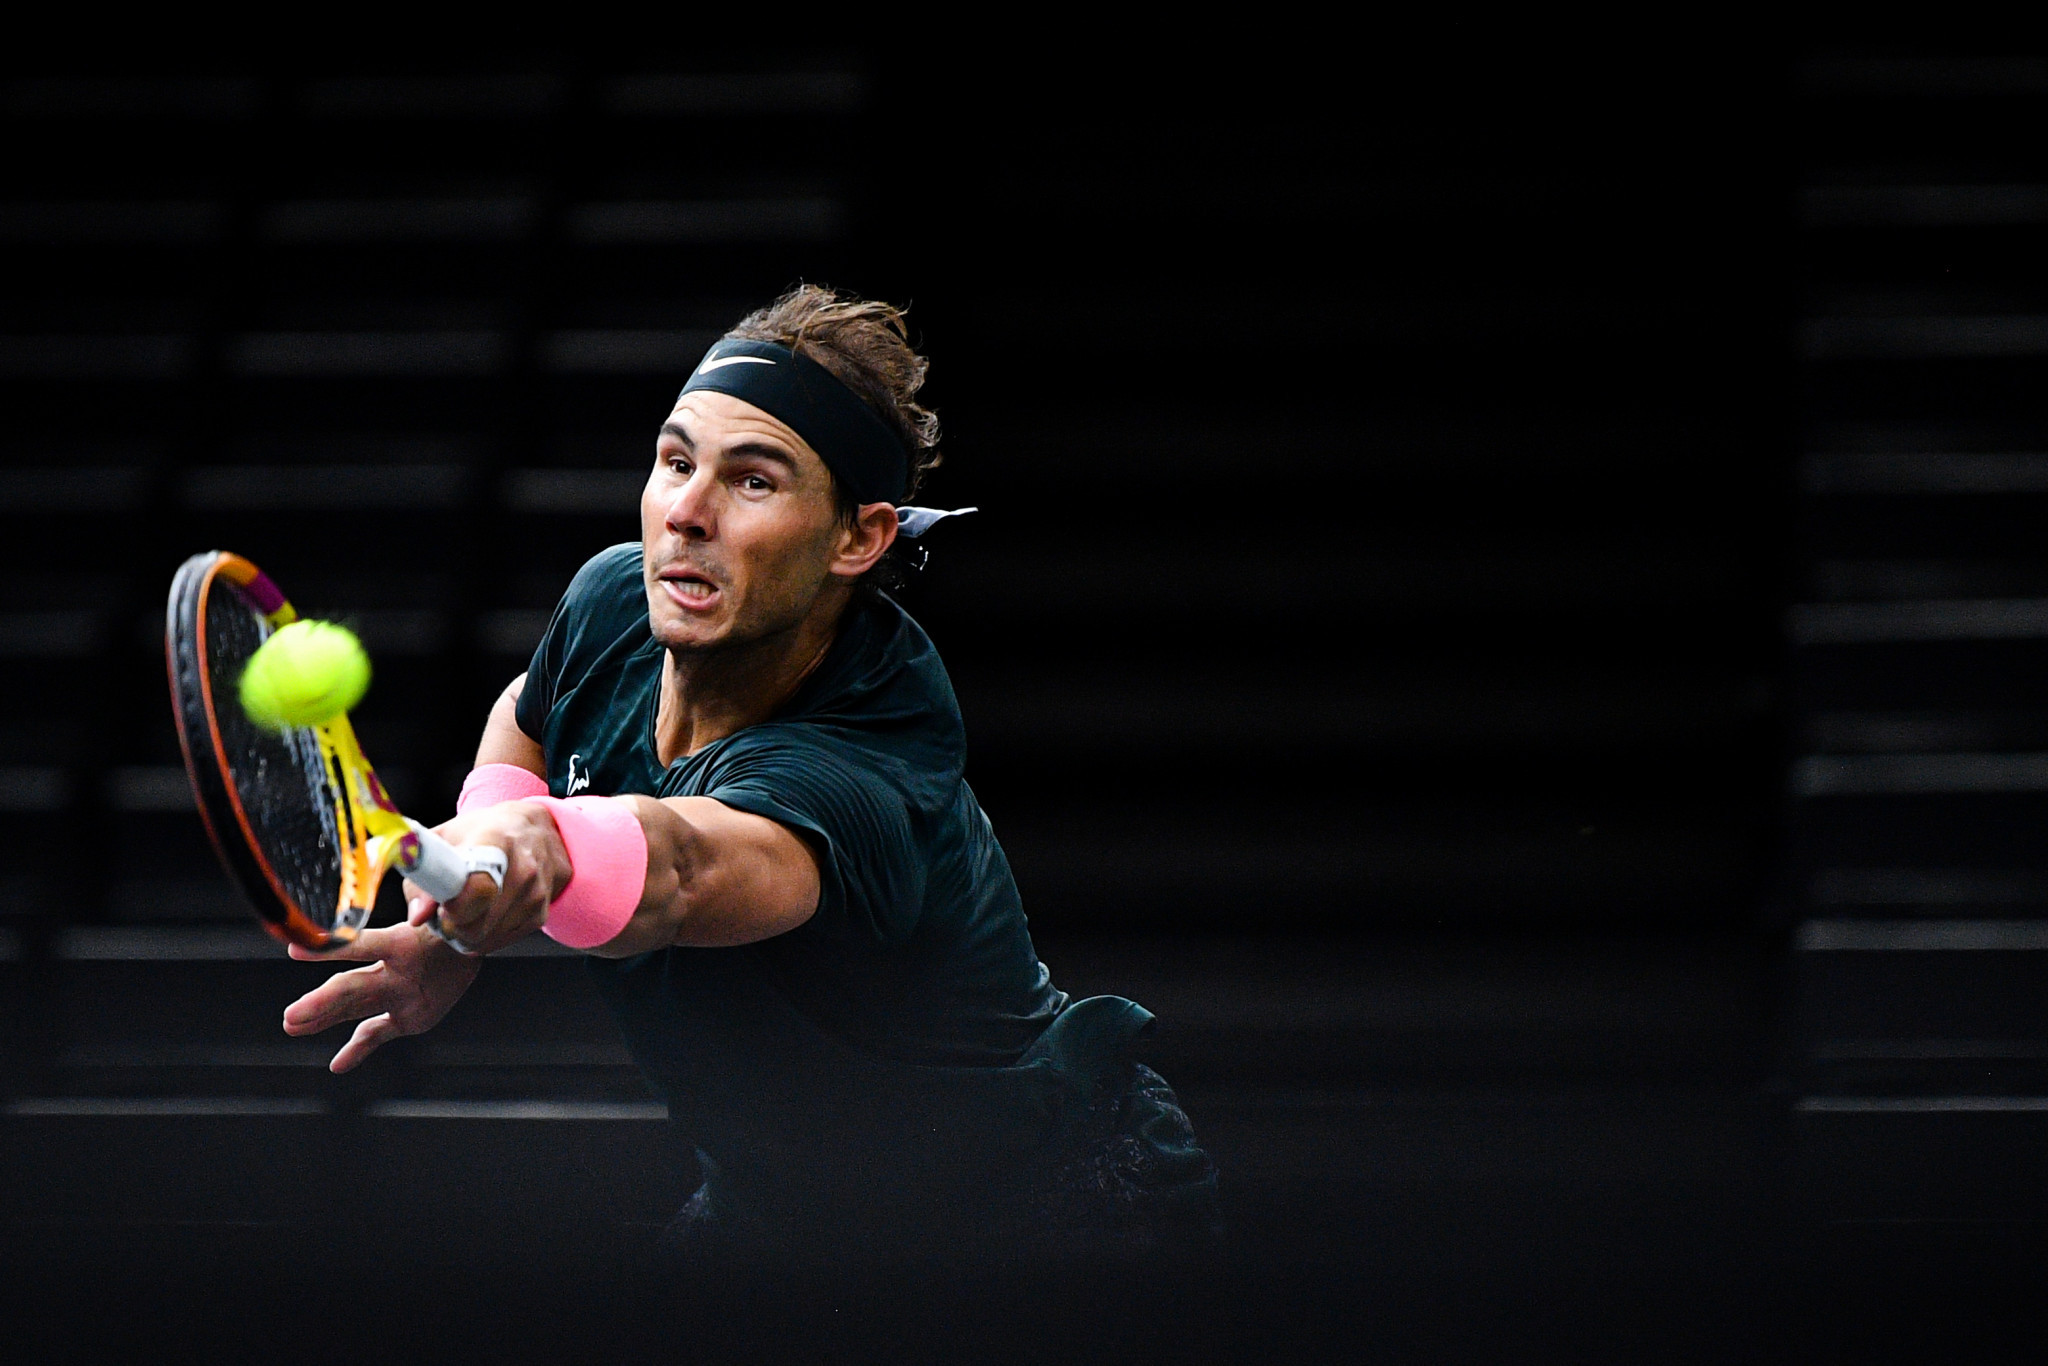 Wawrinka comes from behind to join Nadal in Paris Masters quarter-finals